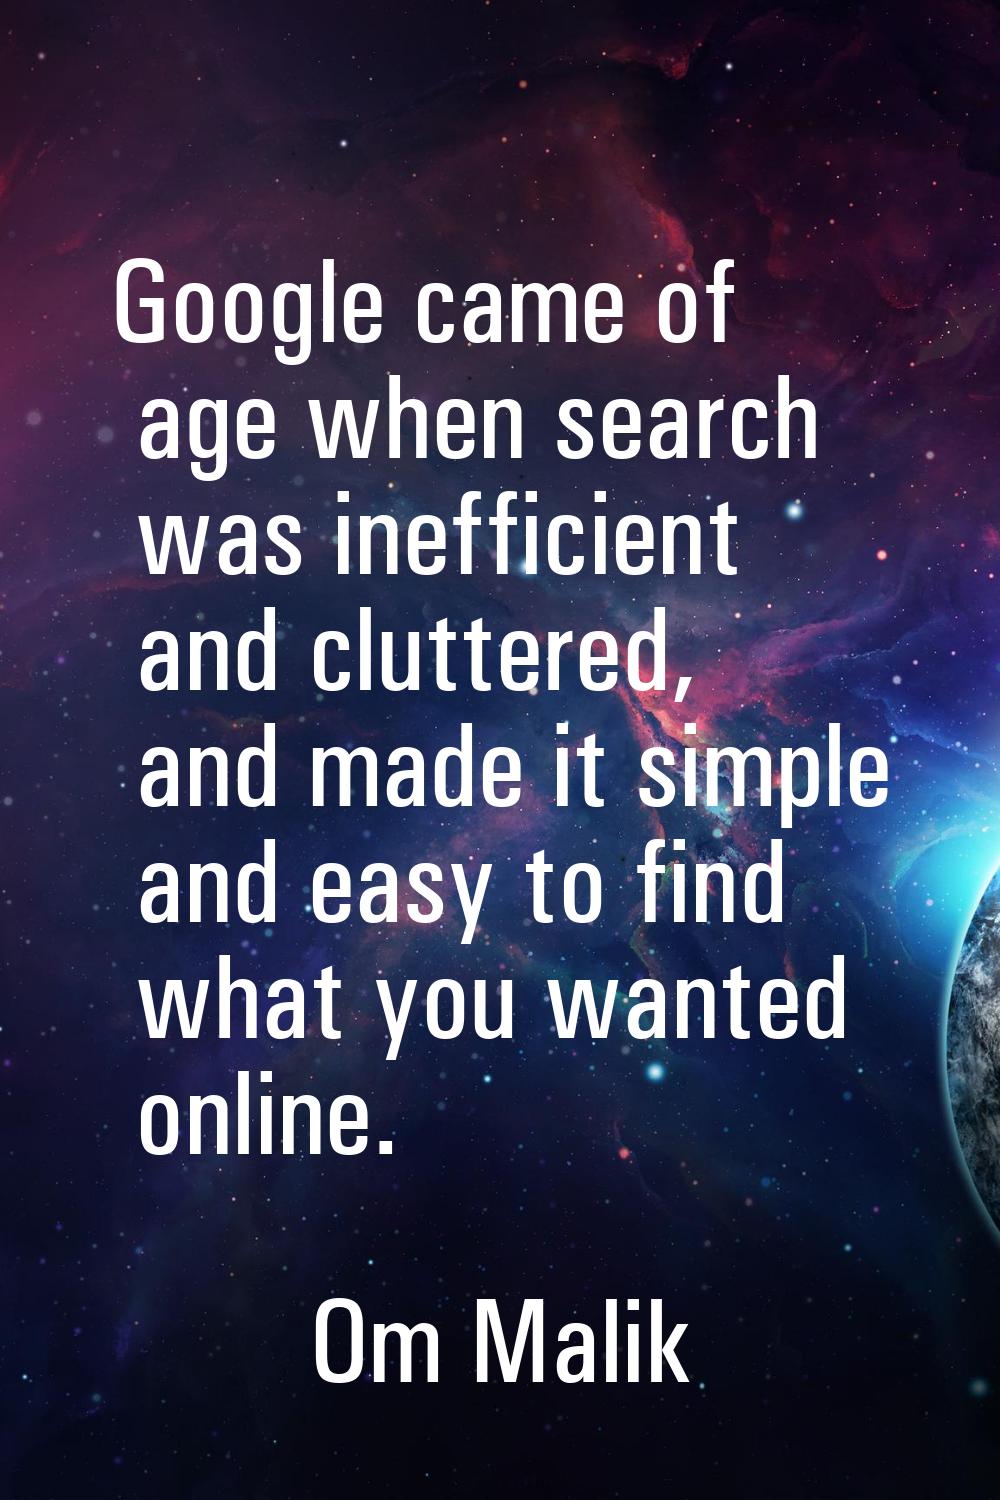 Google came of age when search was inefficient and cluttered, and made it simple and easy to find w